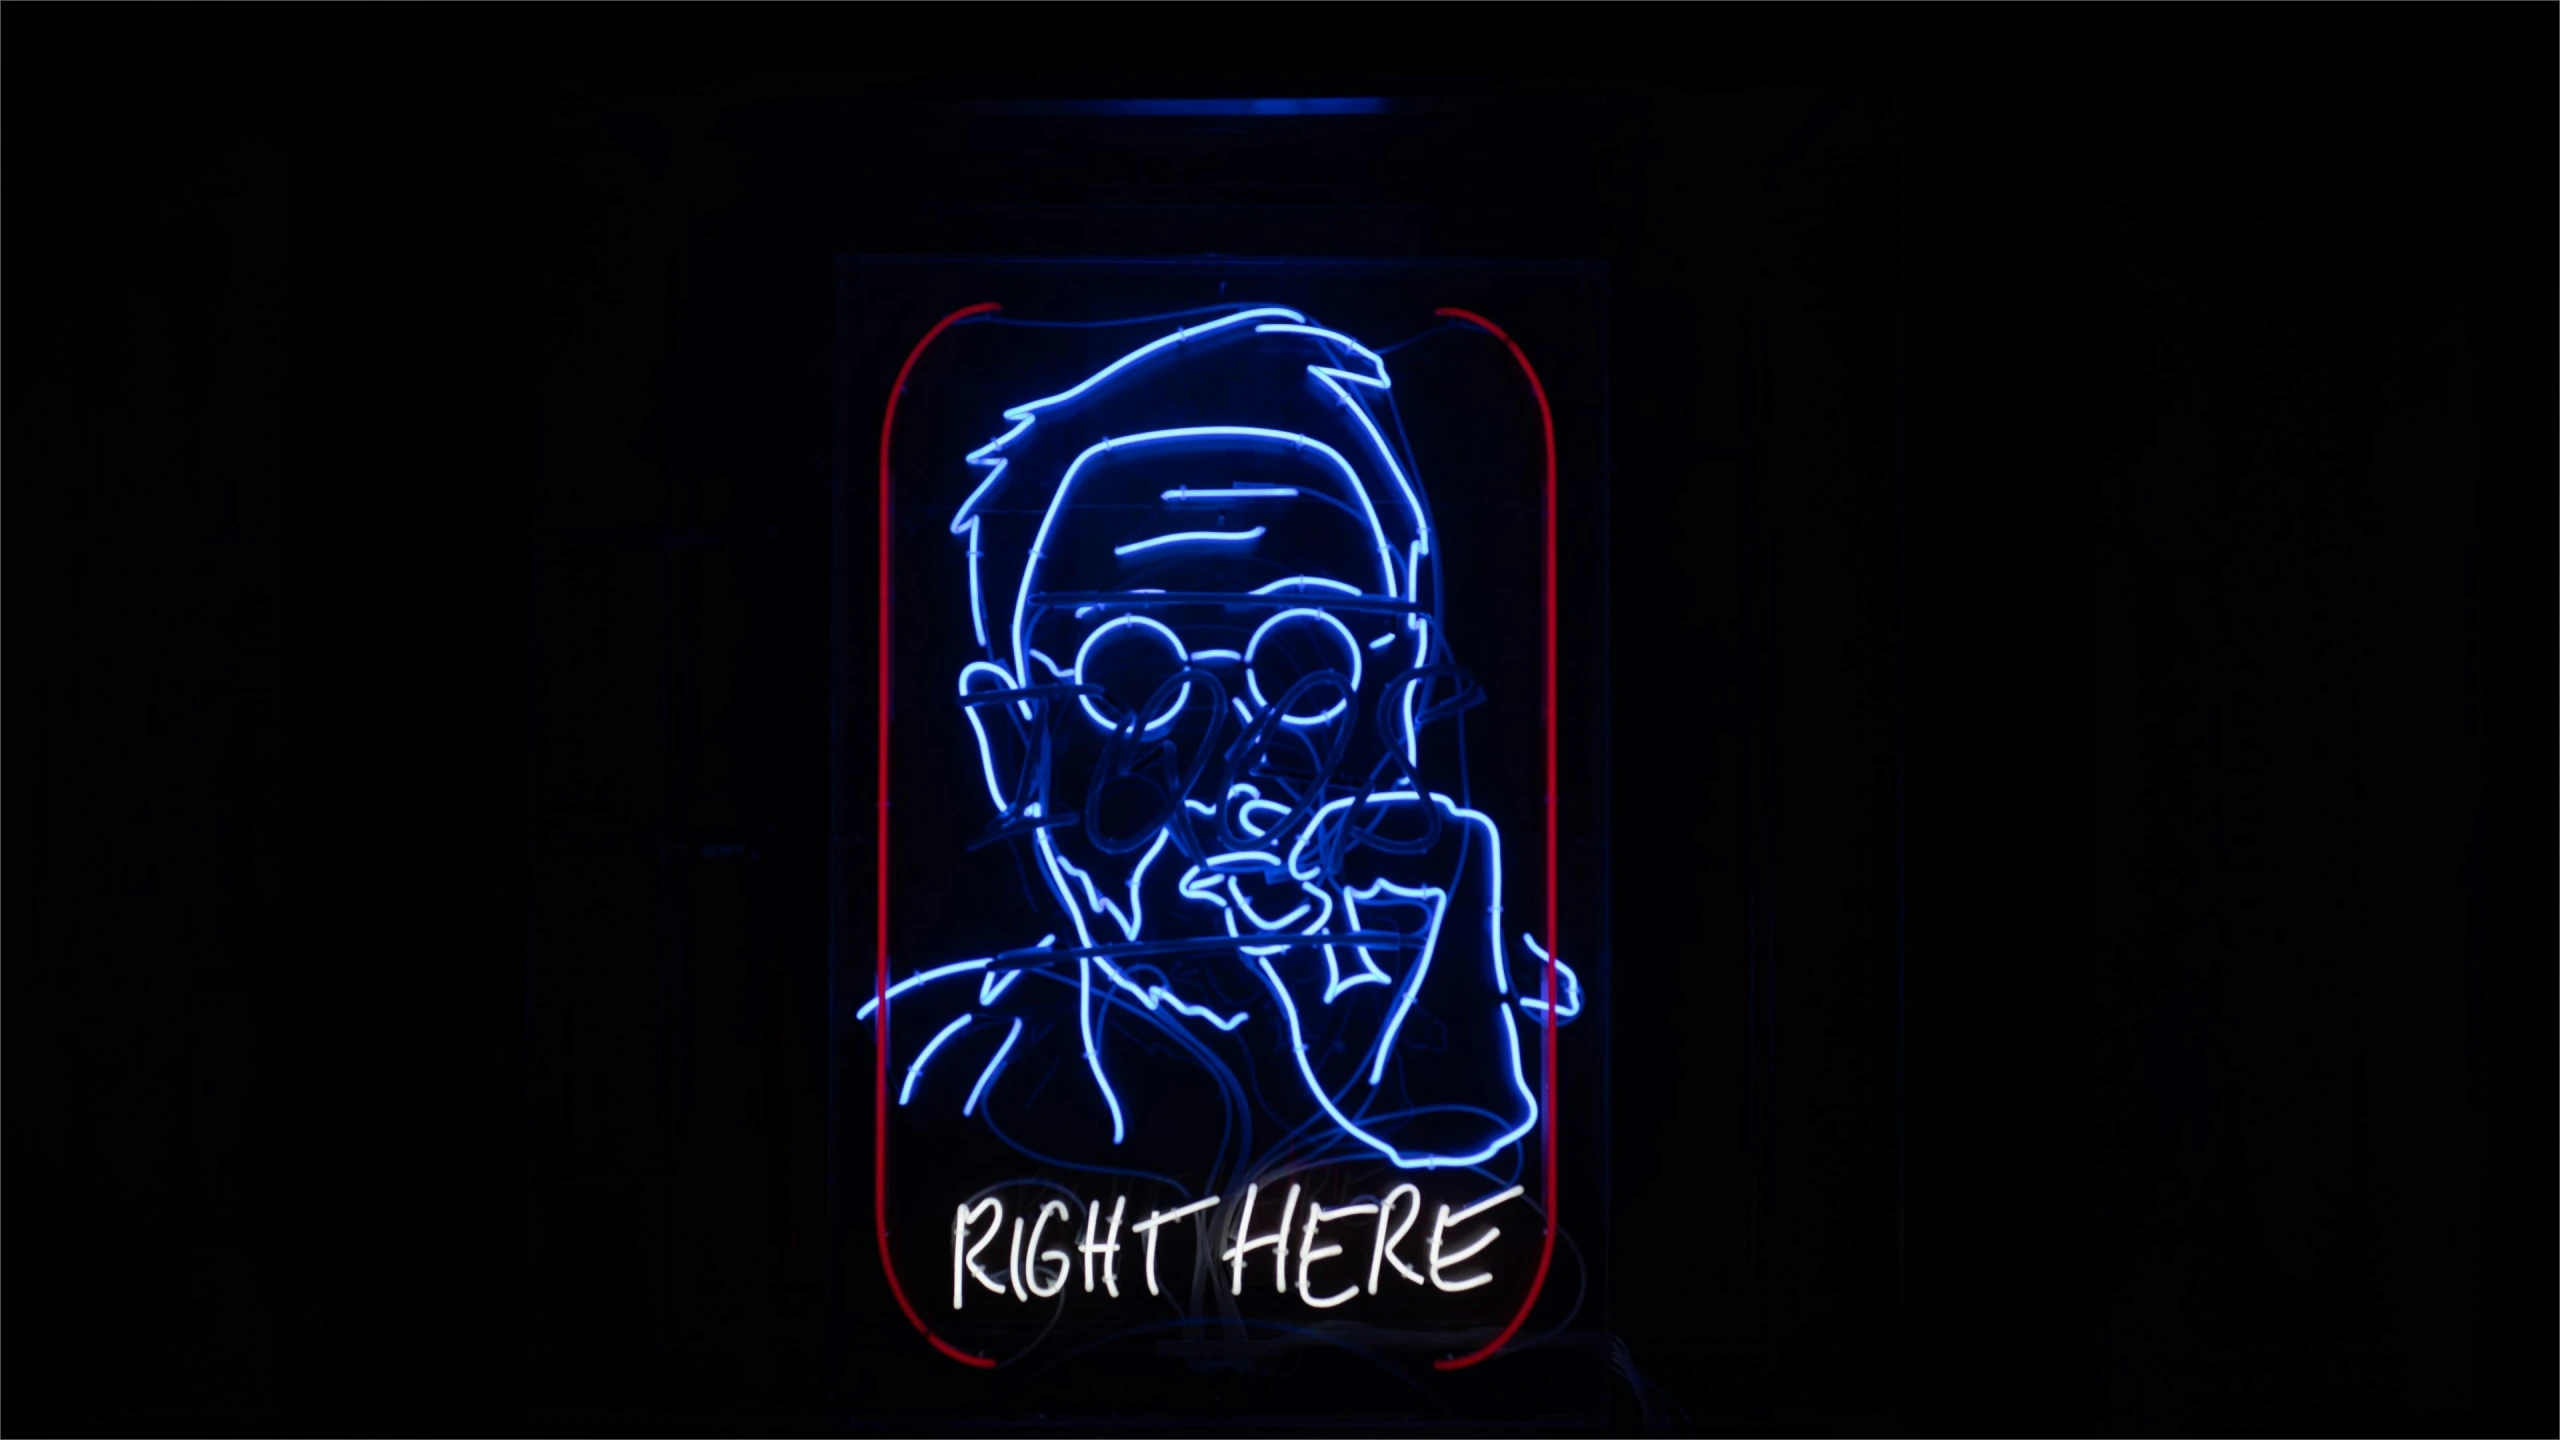 a neon sign is lit in the dark